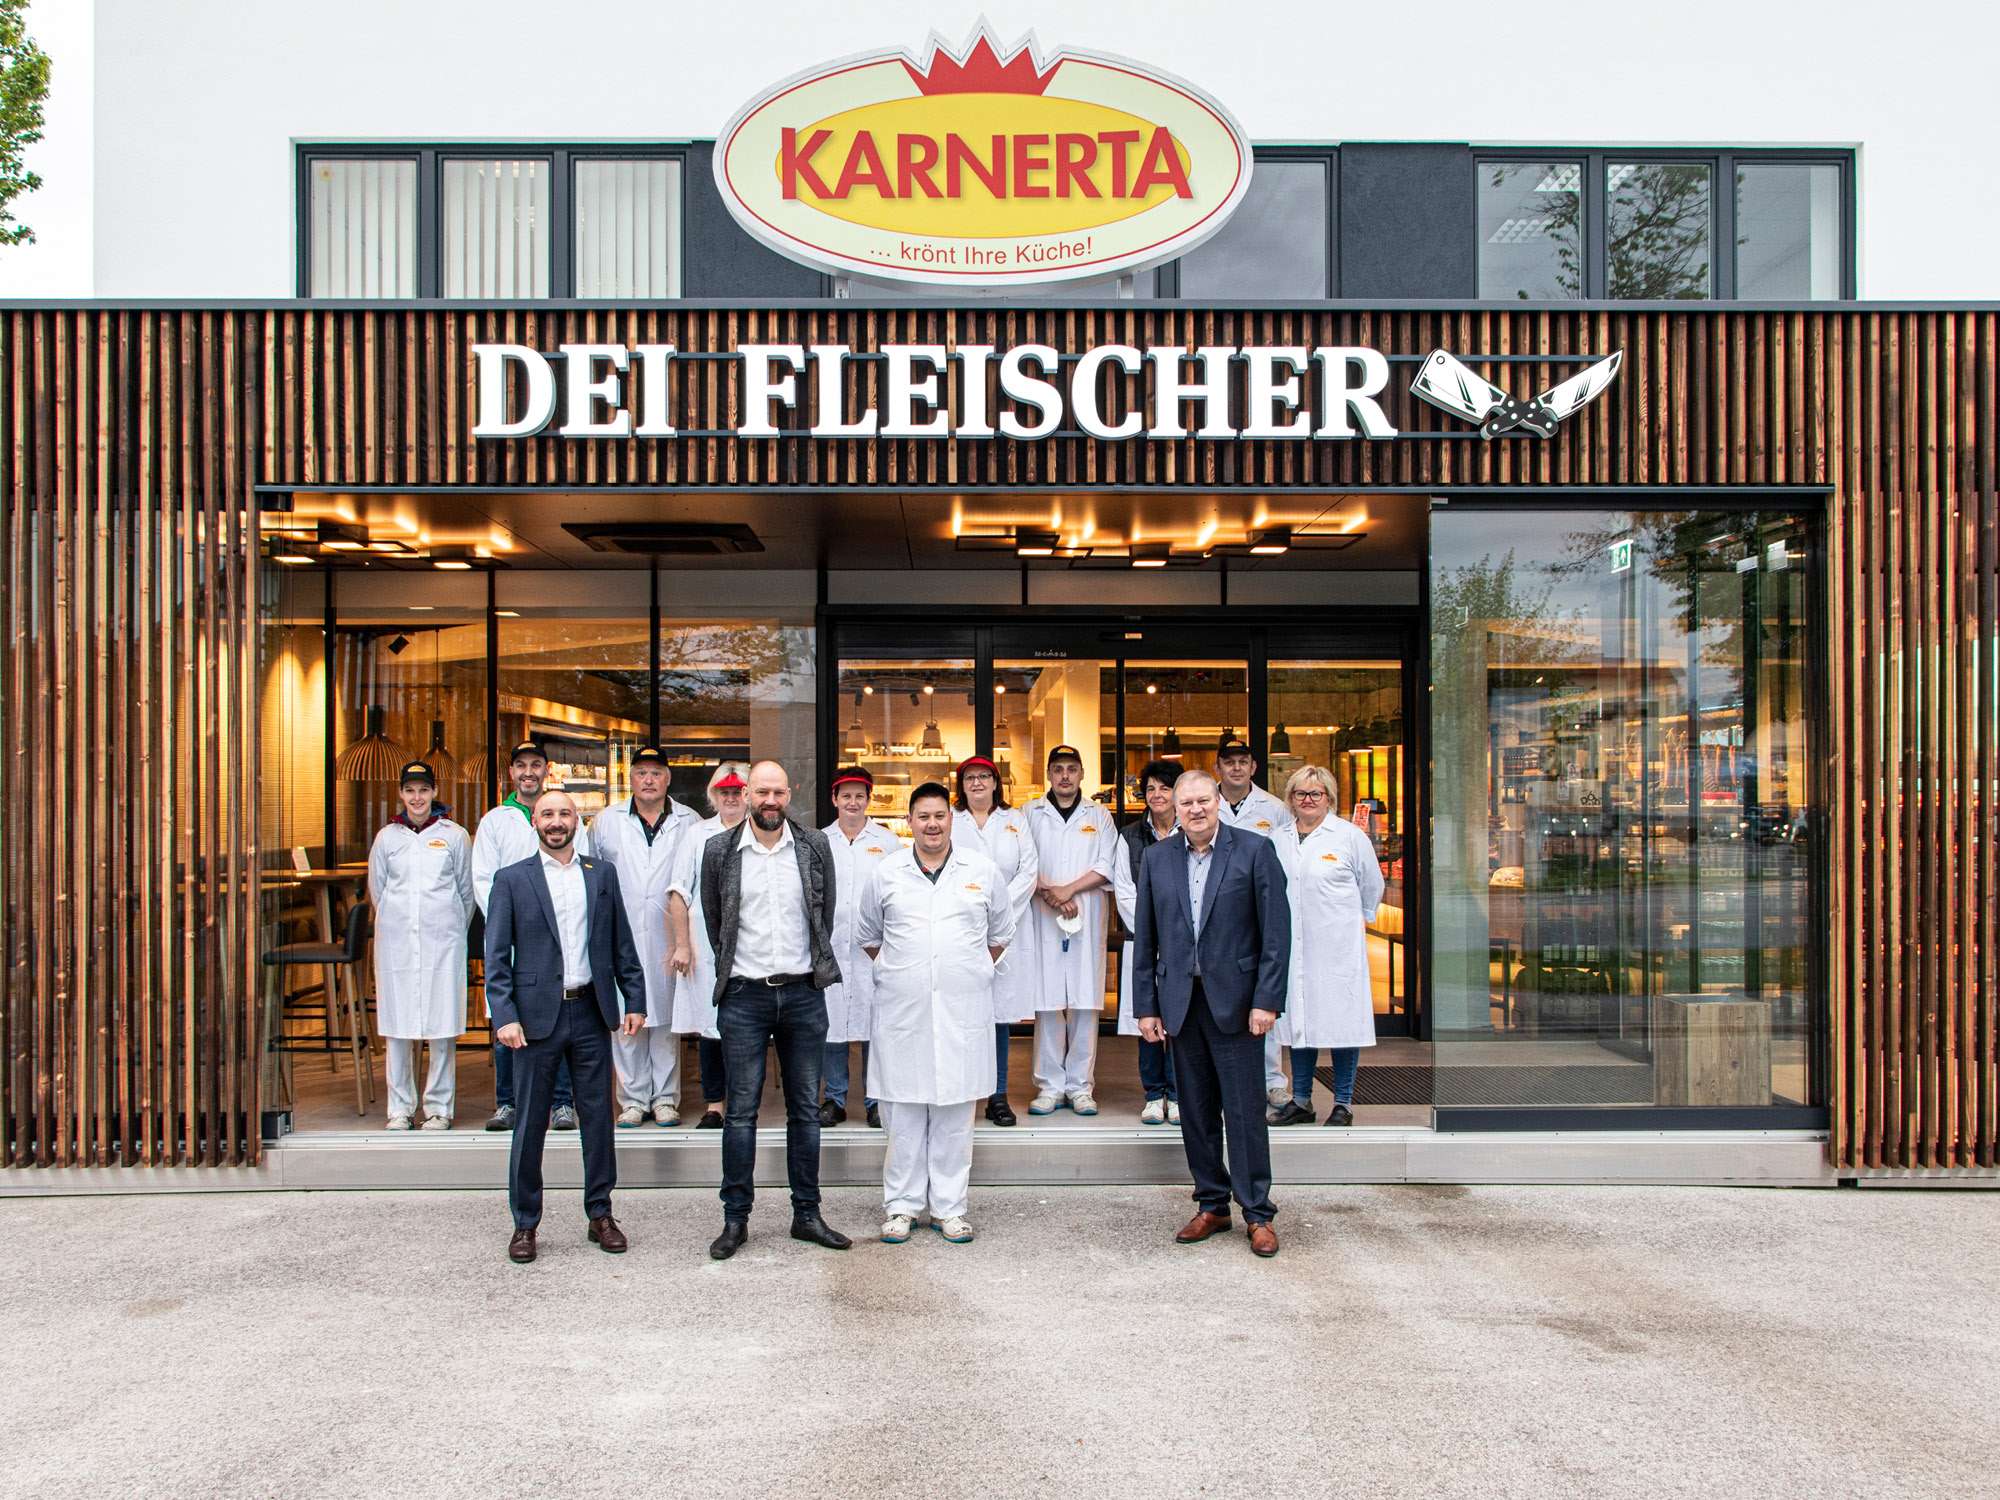 KARNERTA - the local top producer and supplier of meat, fish and pasta